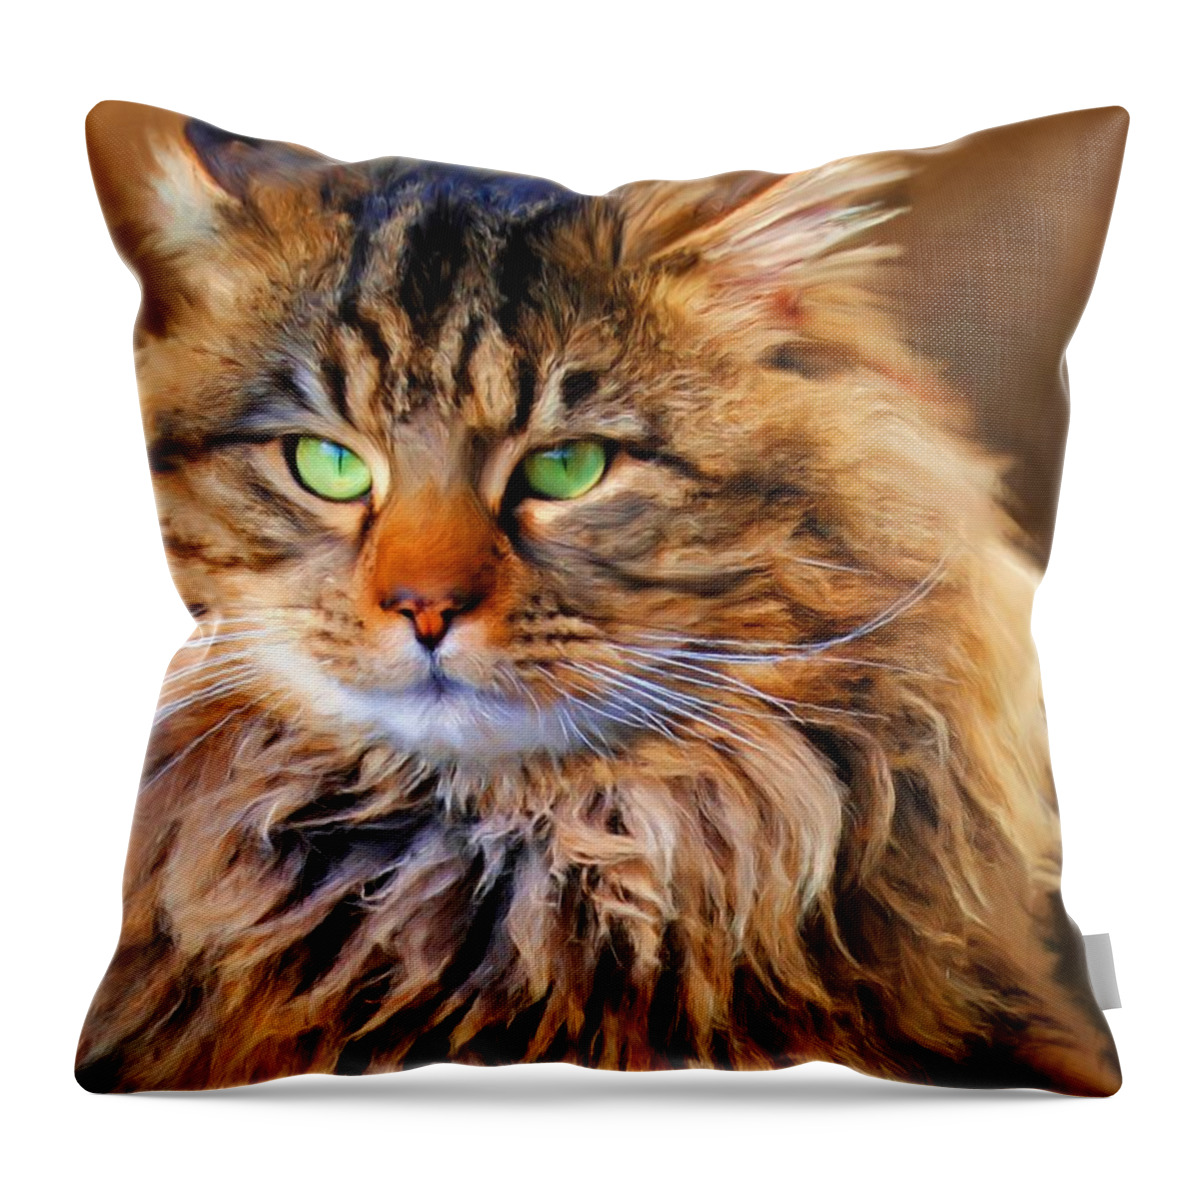 Maine Coon Throw Pillow featuring the painting Maine Coon Cat by Jai Johnson